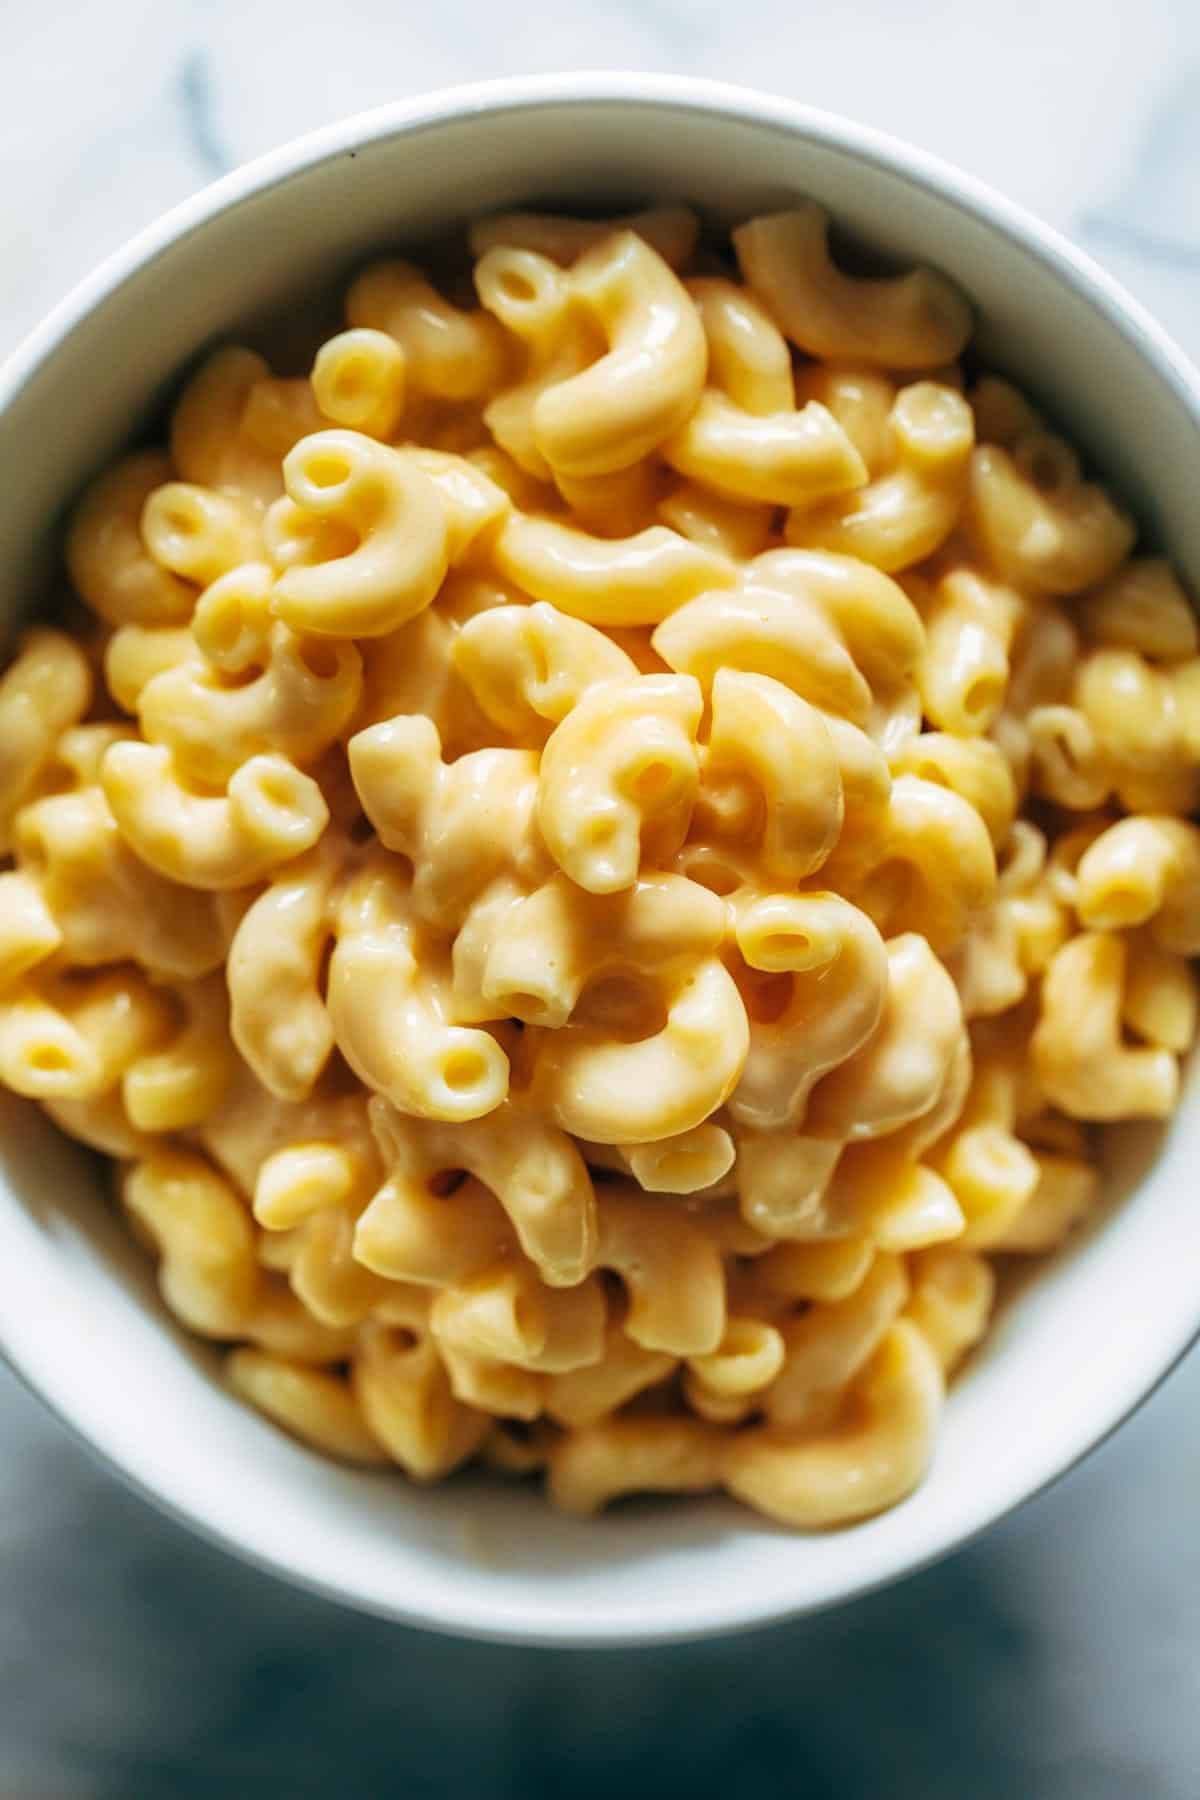 friends mac and cheese thanks for your help